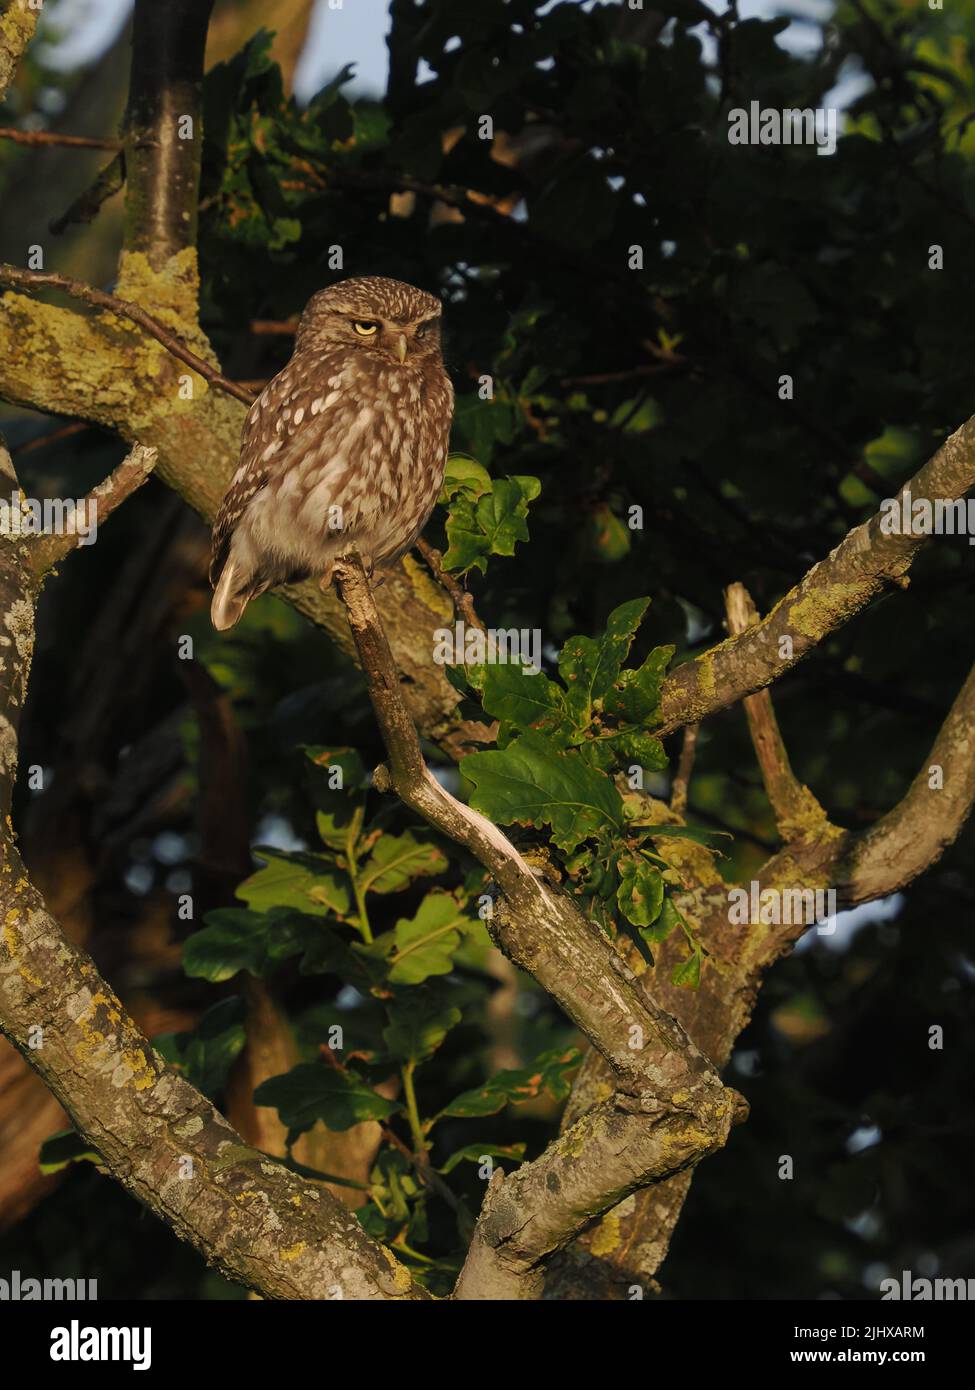 Little owl have favourite perches they use, often near farms or agricultural land. Stock Photo